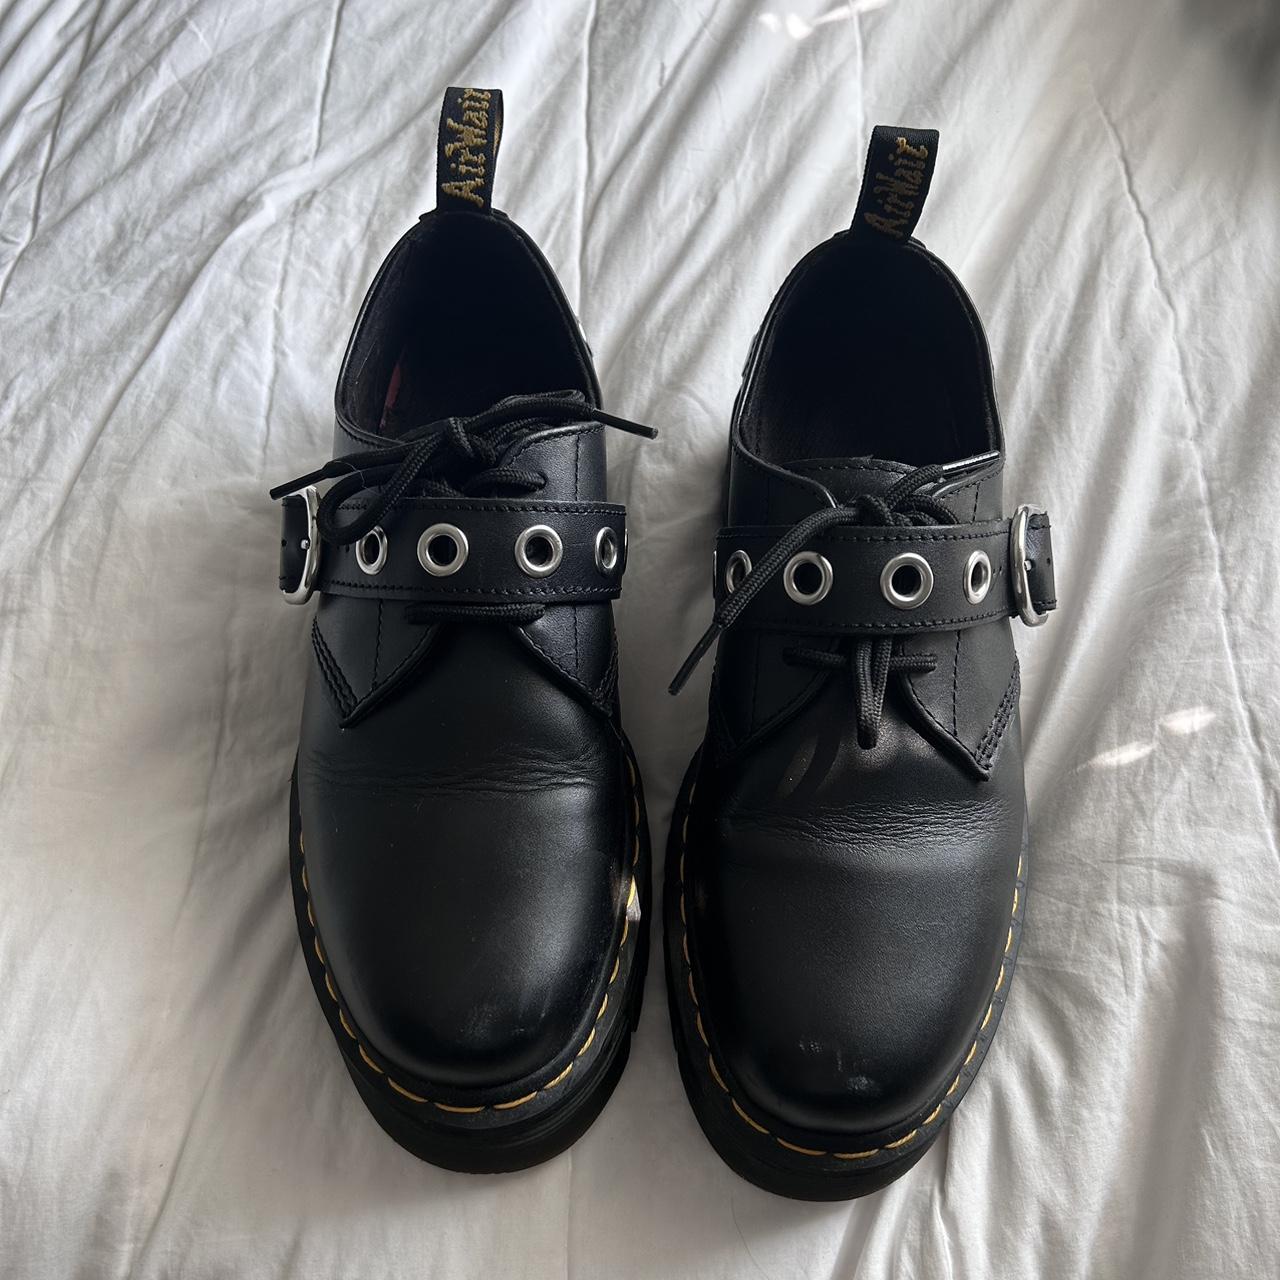 Dr. Martens Women's Black and Silver Loafers (2)